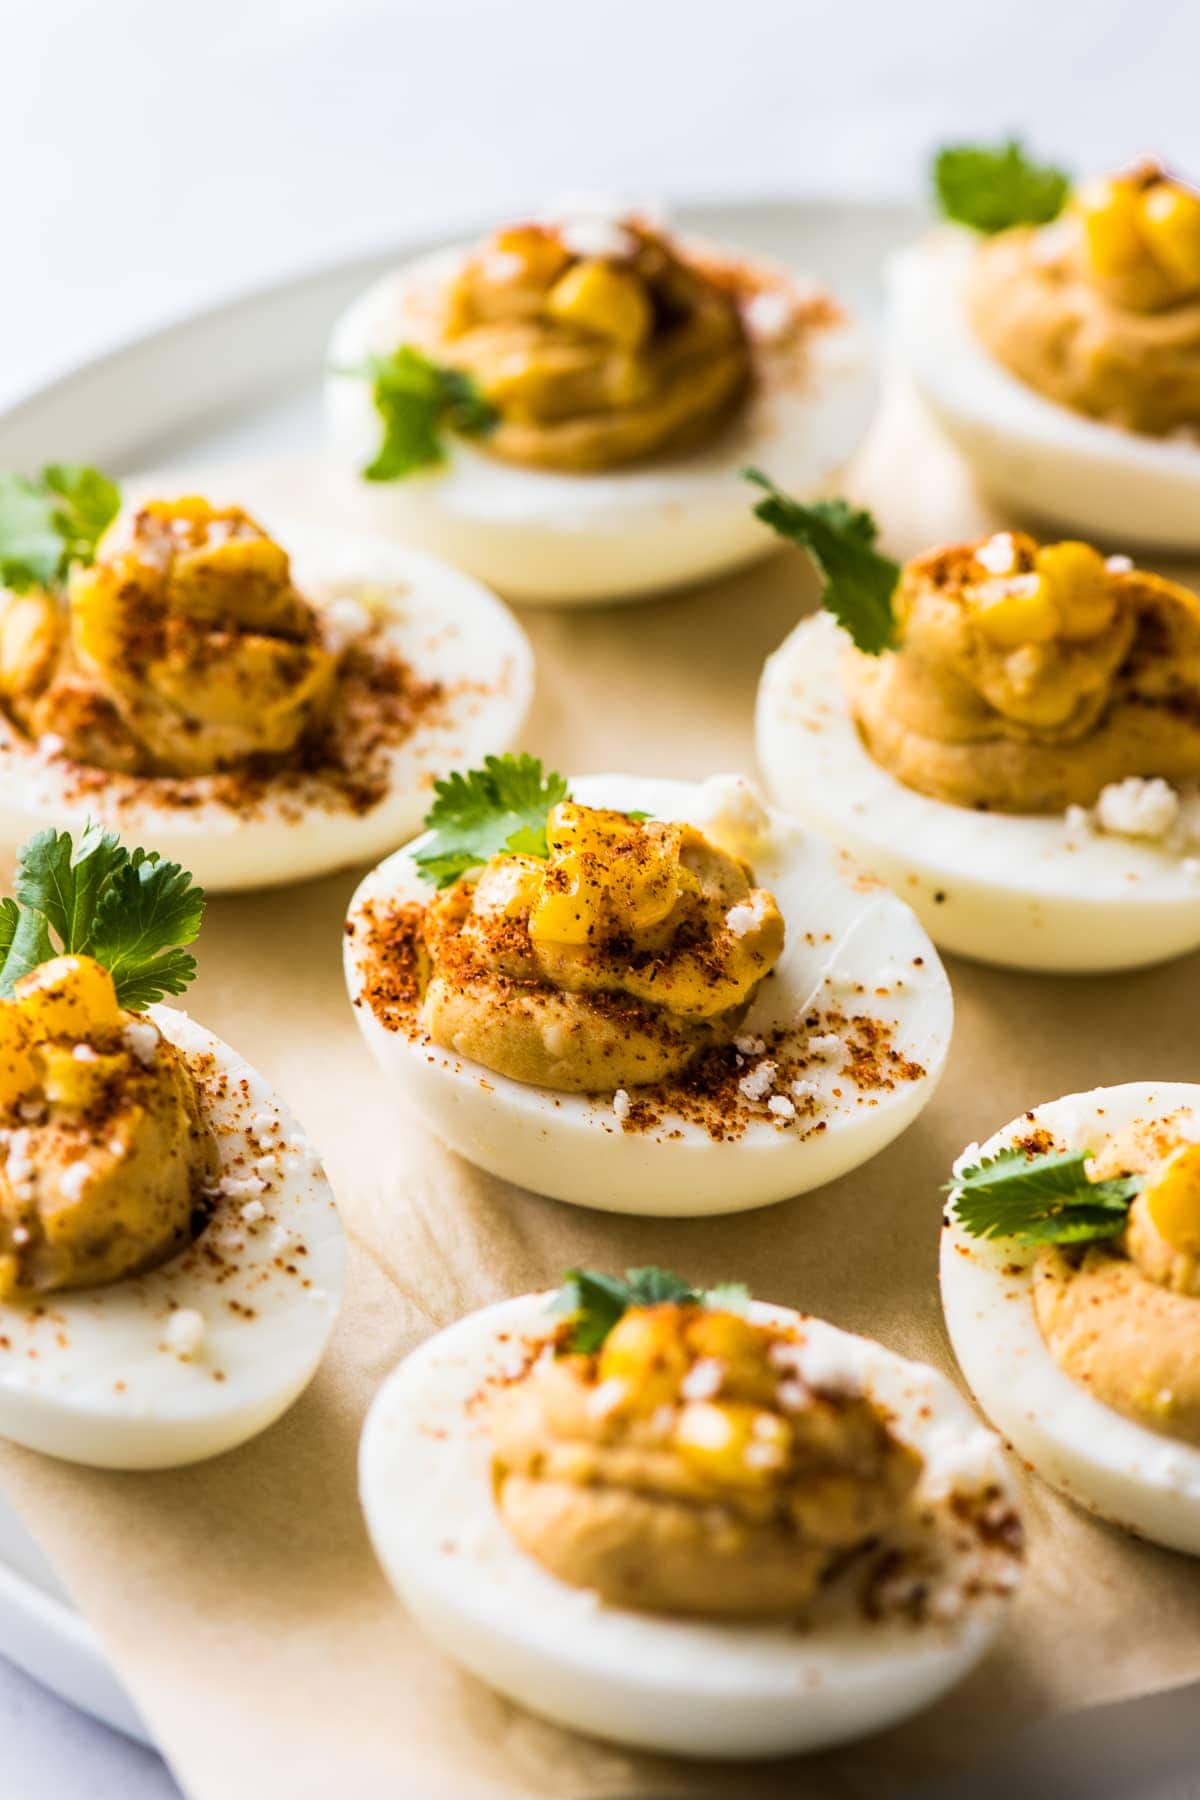 https://www.isabeleats.com/wp-content/uploads/2021/03/mexican-street-corn-deviled-eggs-small-6.jpg